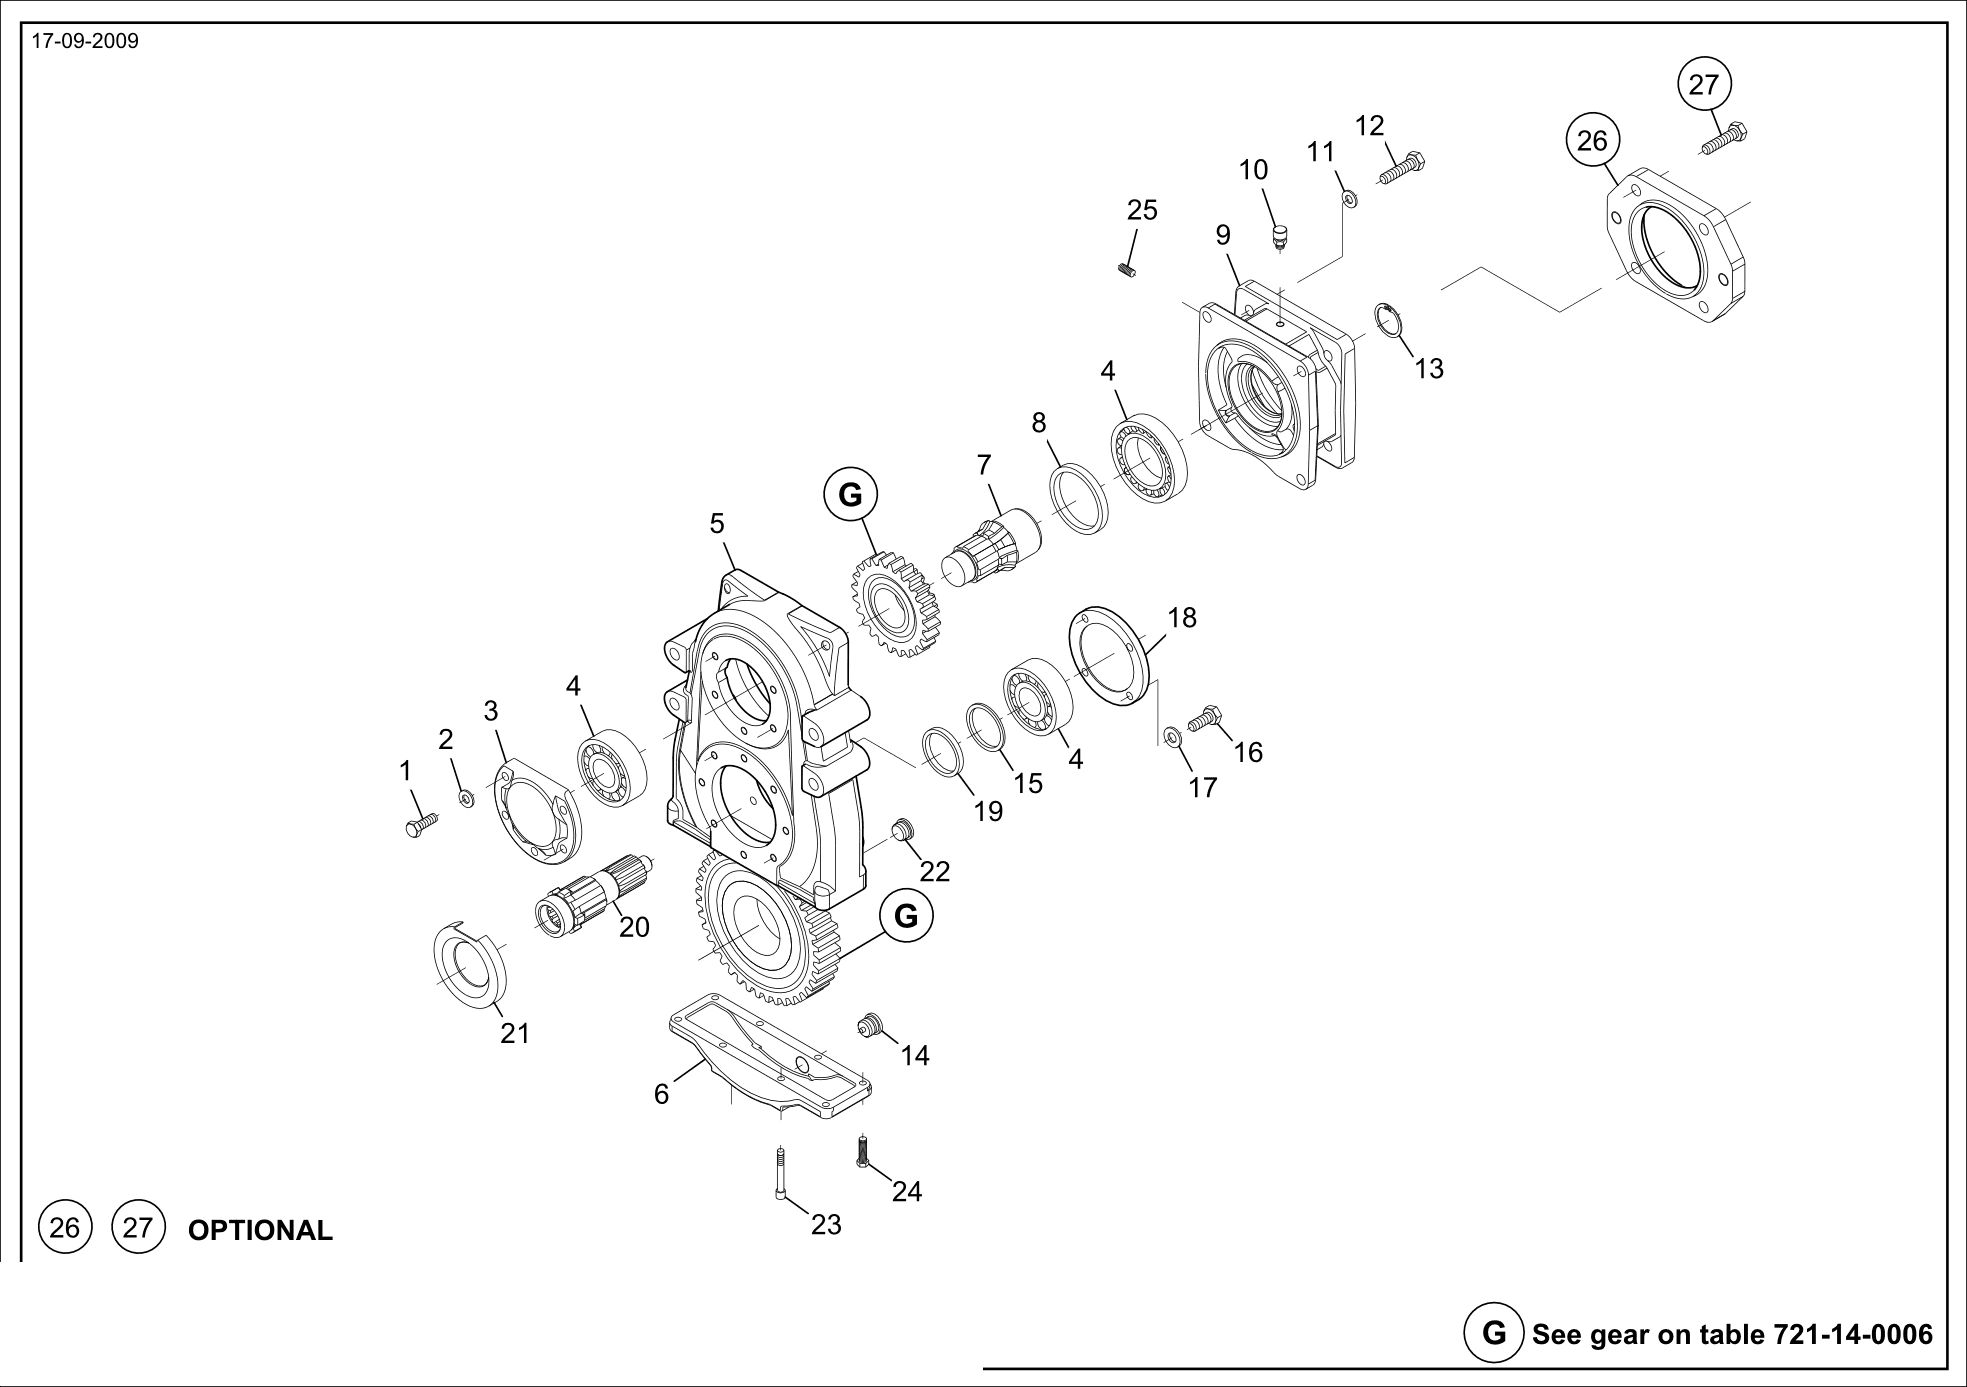 drawing for CNH NEW HOLLAND 87603837 - BEARING (figure 5)